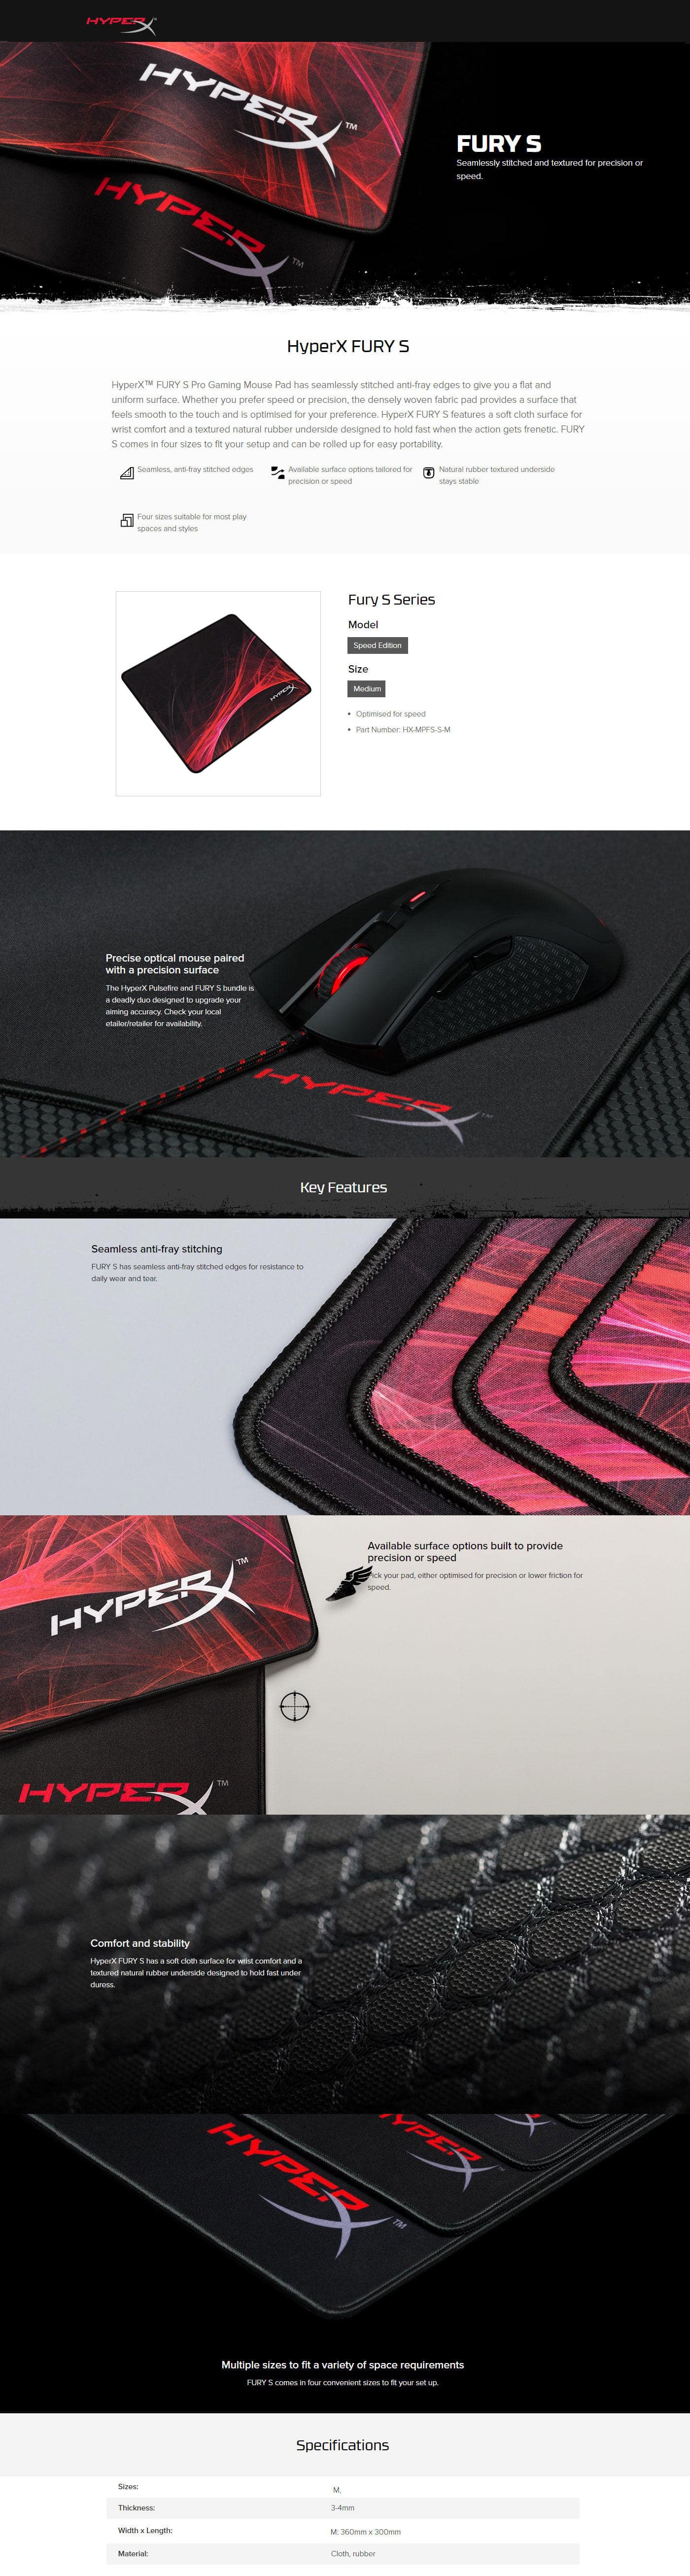  Buy Online HyperX FURY S Speed Edition Gaming Mouse Pad - Medium (HX-MPFS-S-M)